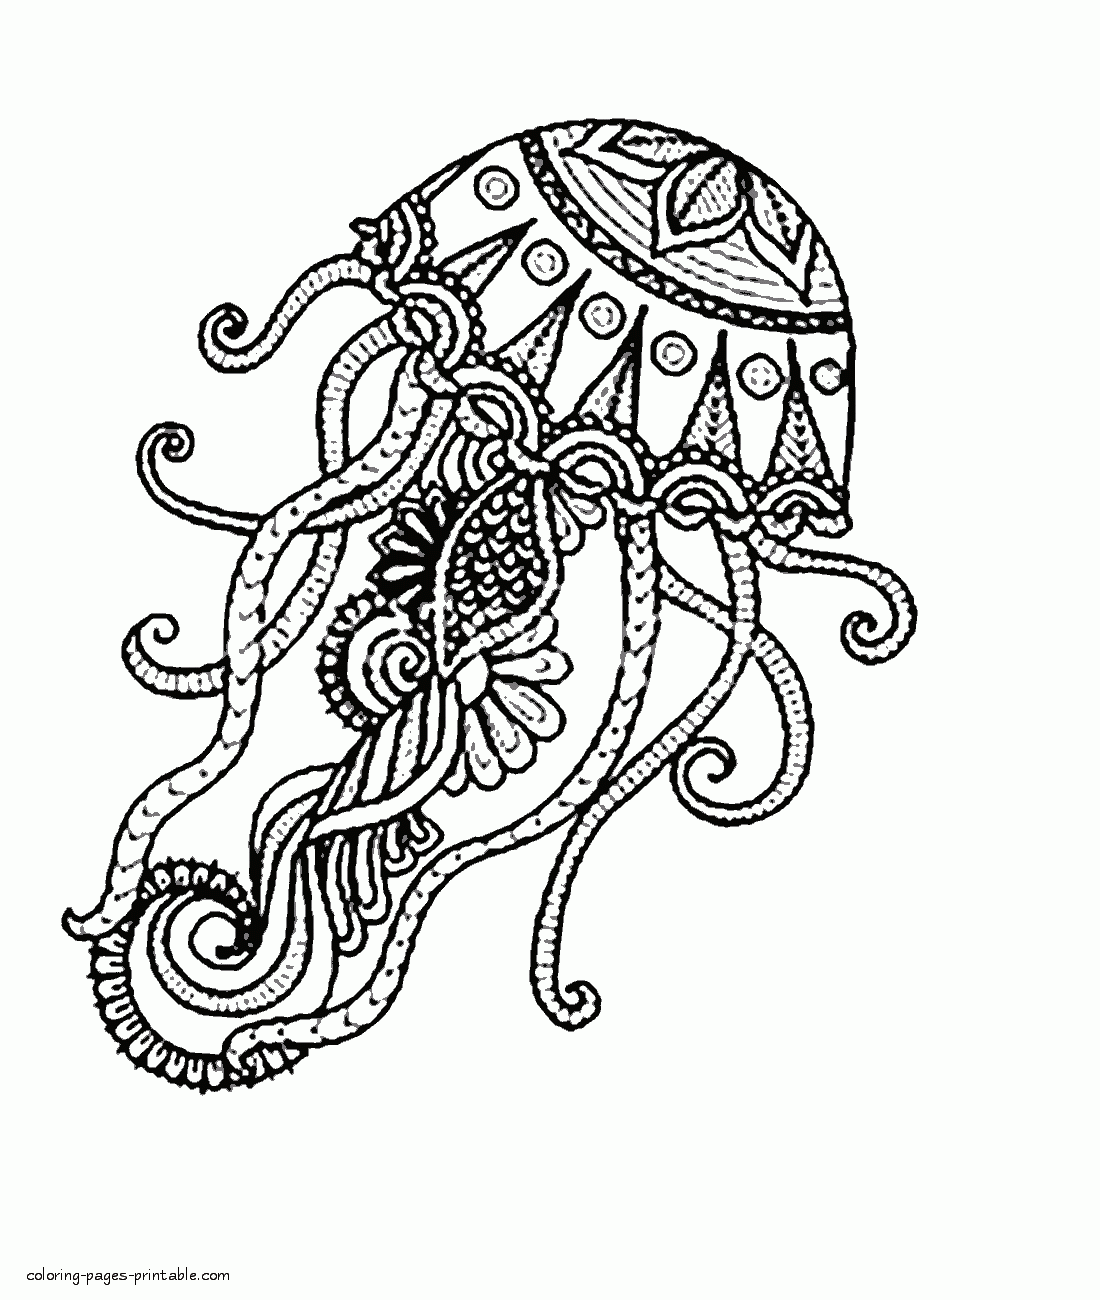 Jellyfish Adult Coloring Page. Sea Animal